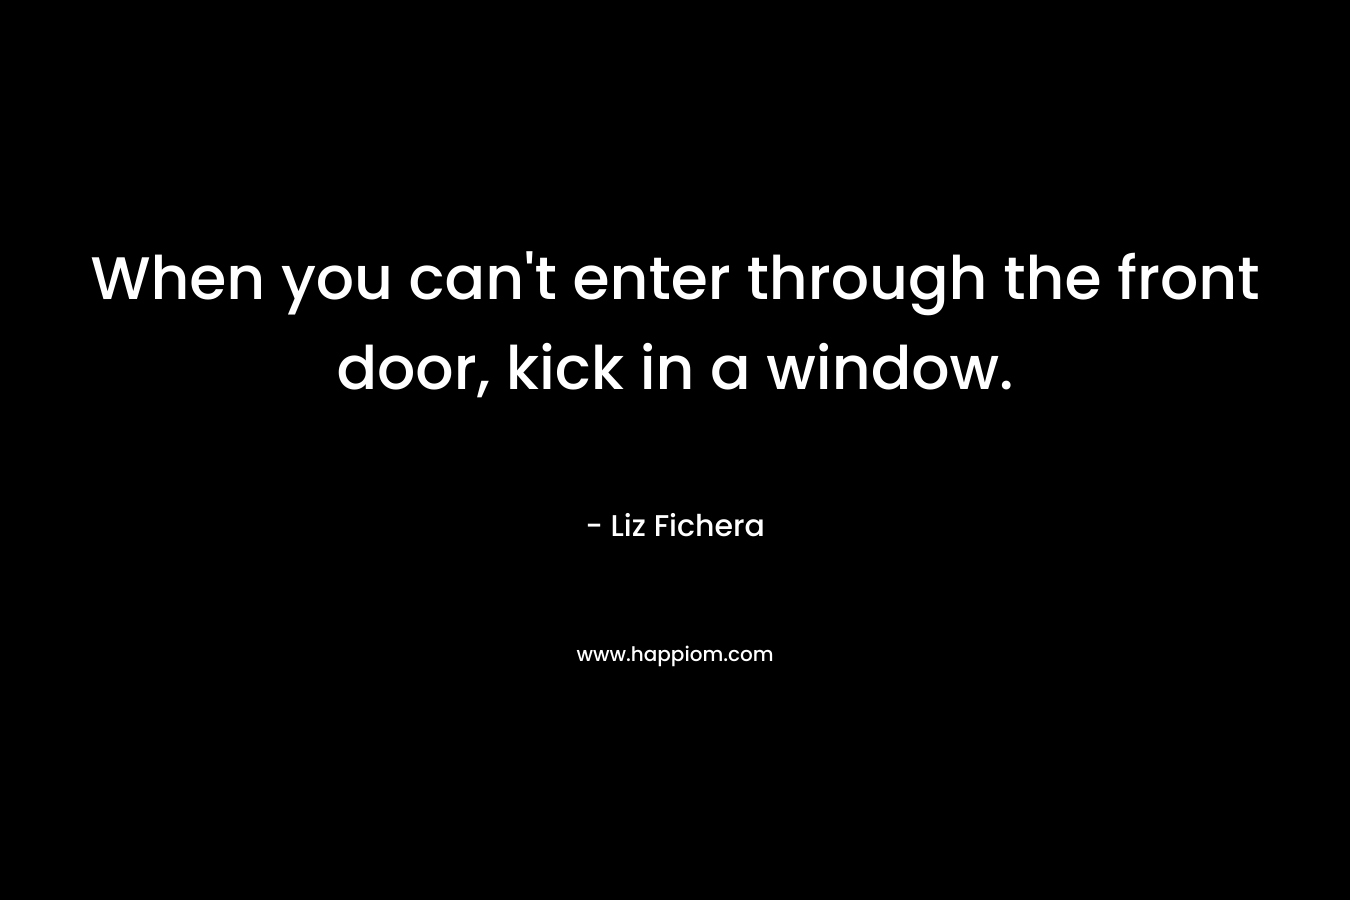 When you can't enter through the front door, kick in a window.